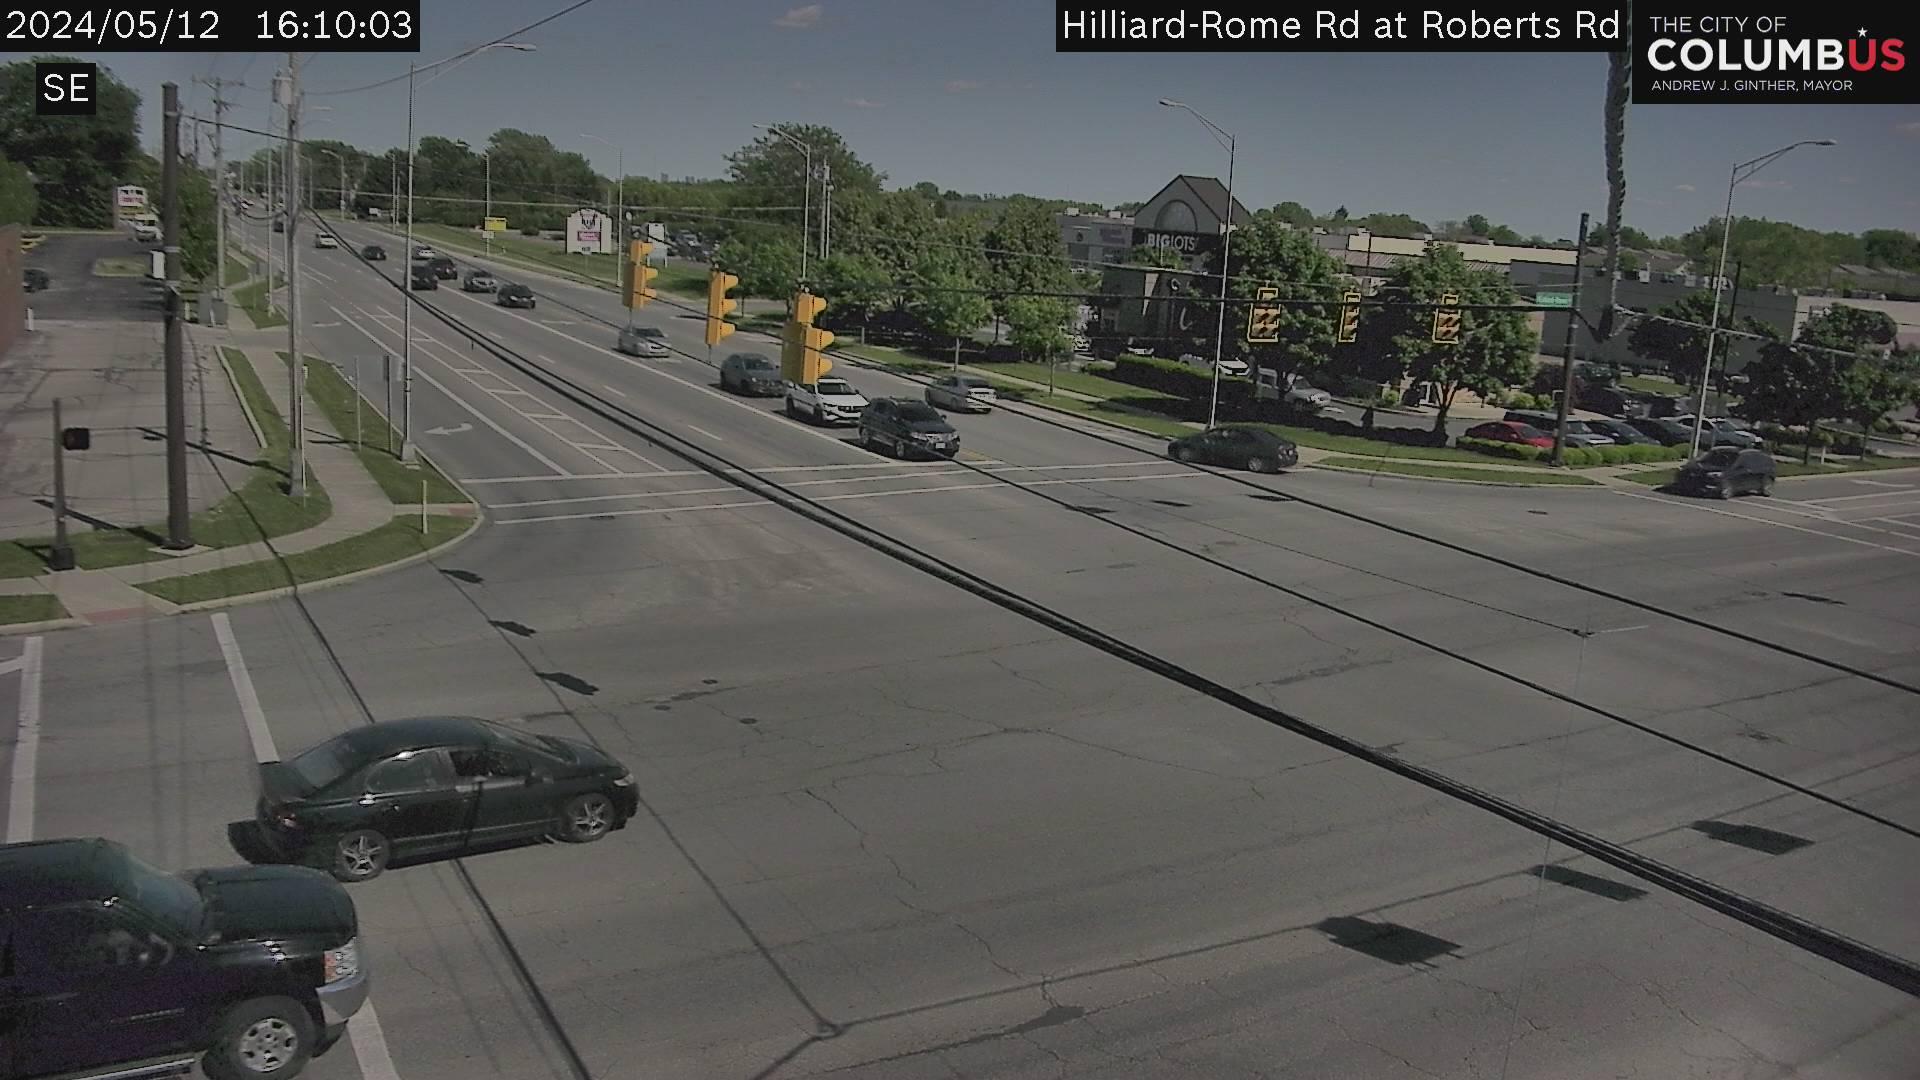 Traffic Cam Hilliard: City of Columbus - Rome Rd at Roberts Rd Player